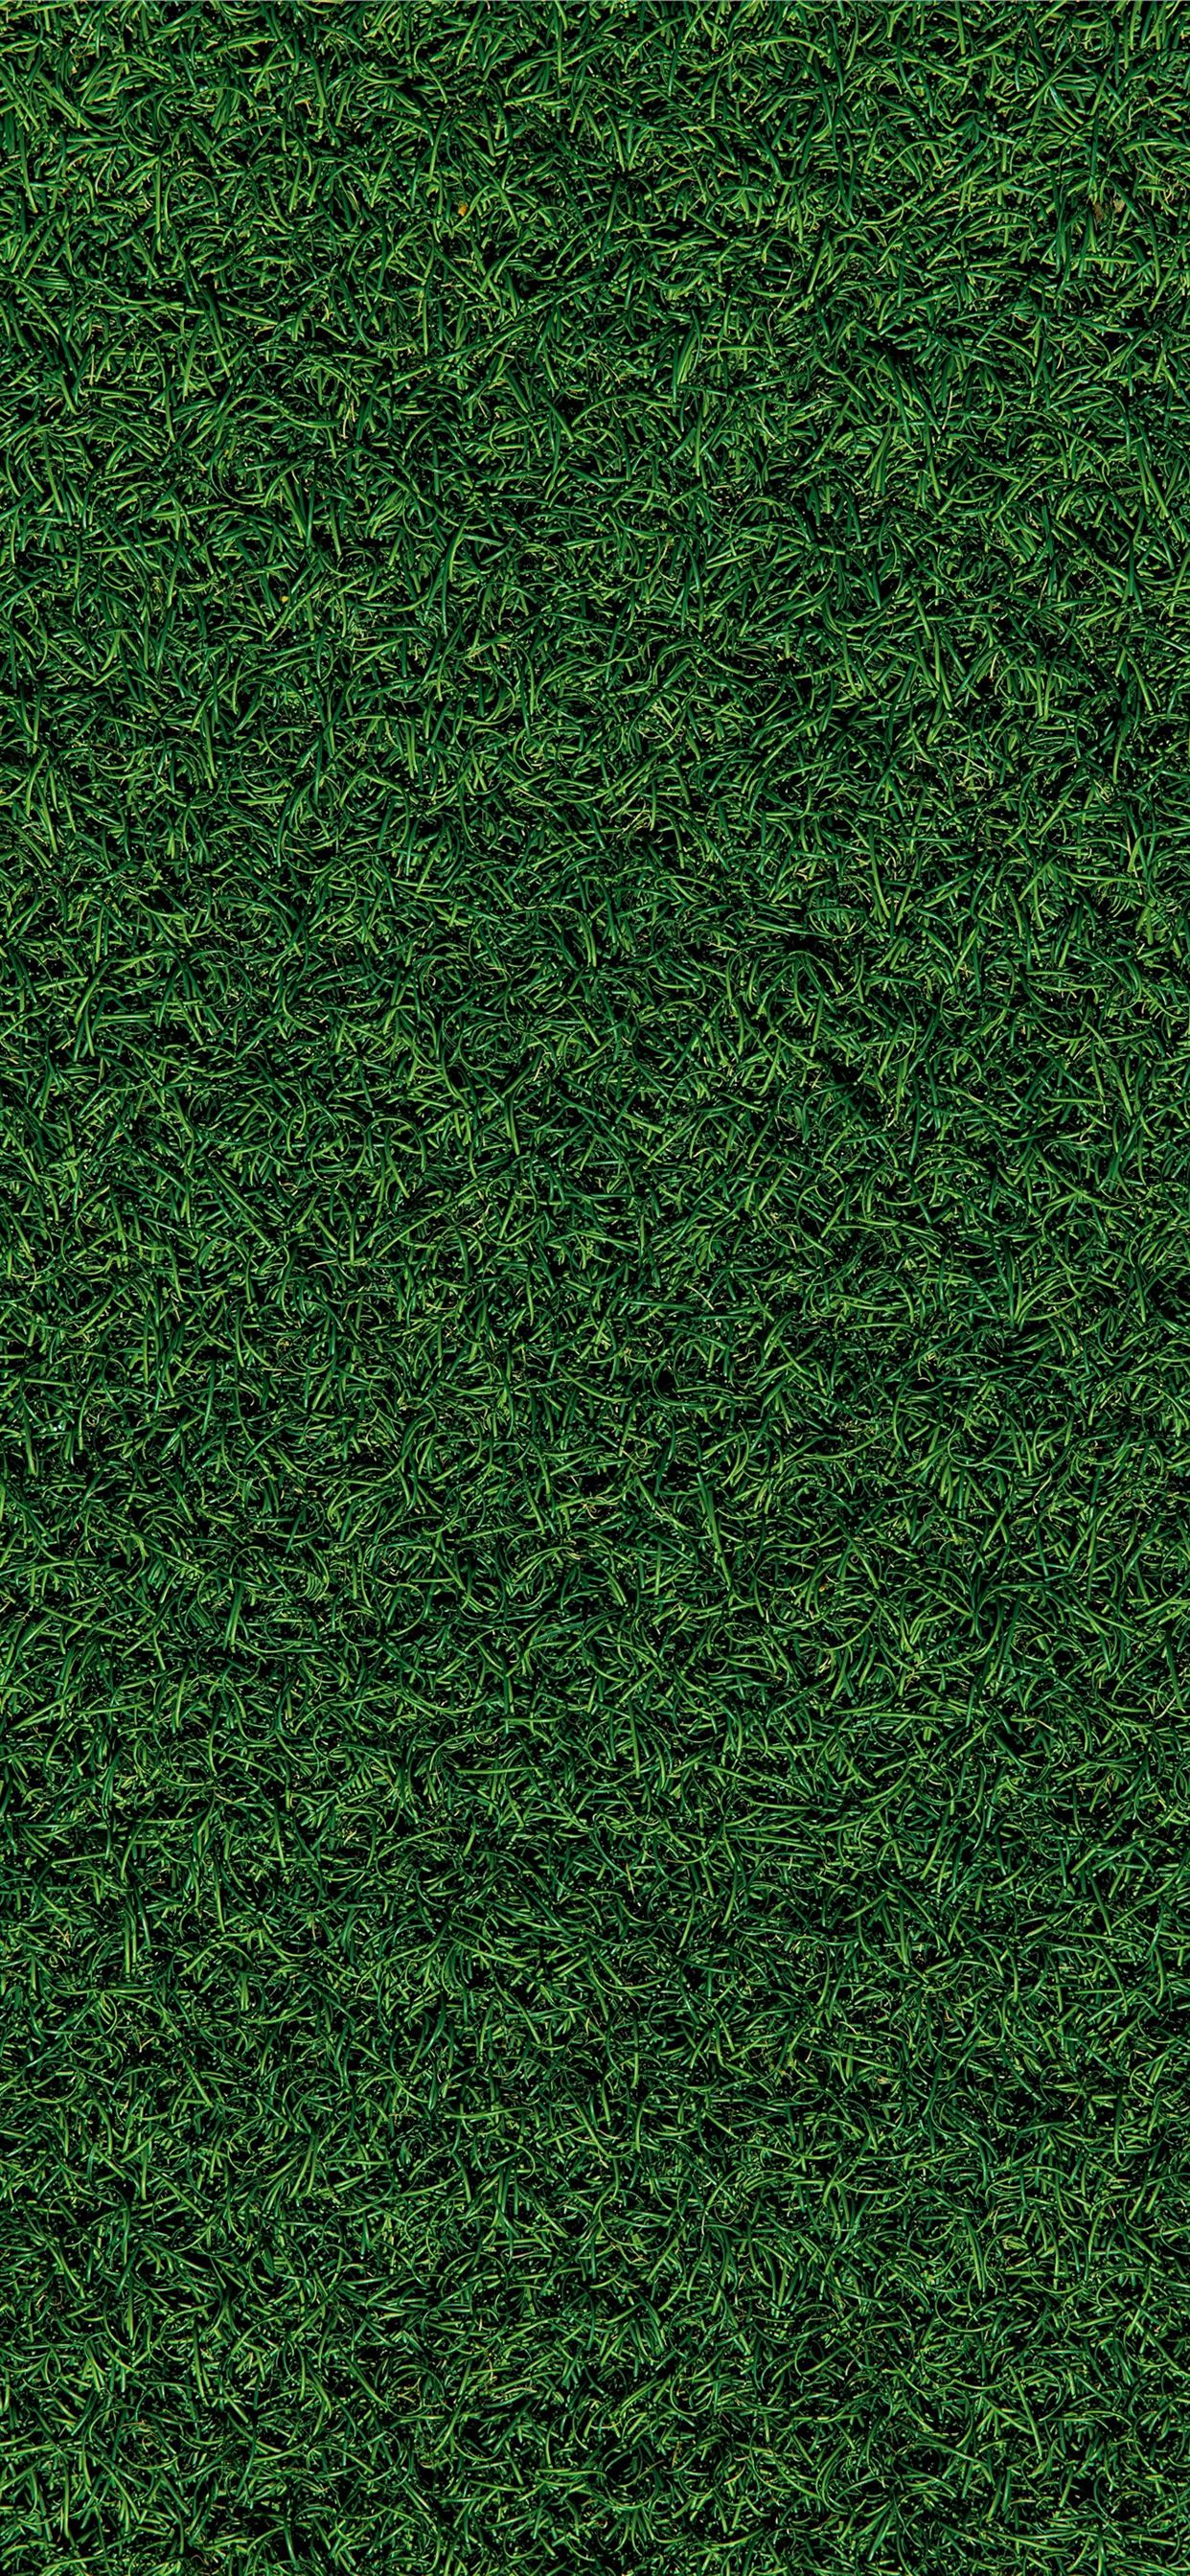 green grass field during daytime iPhone Wallpaper Free Download